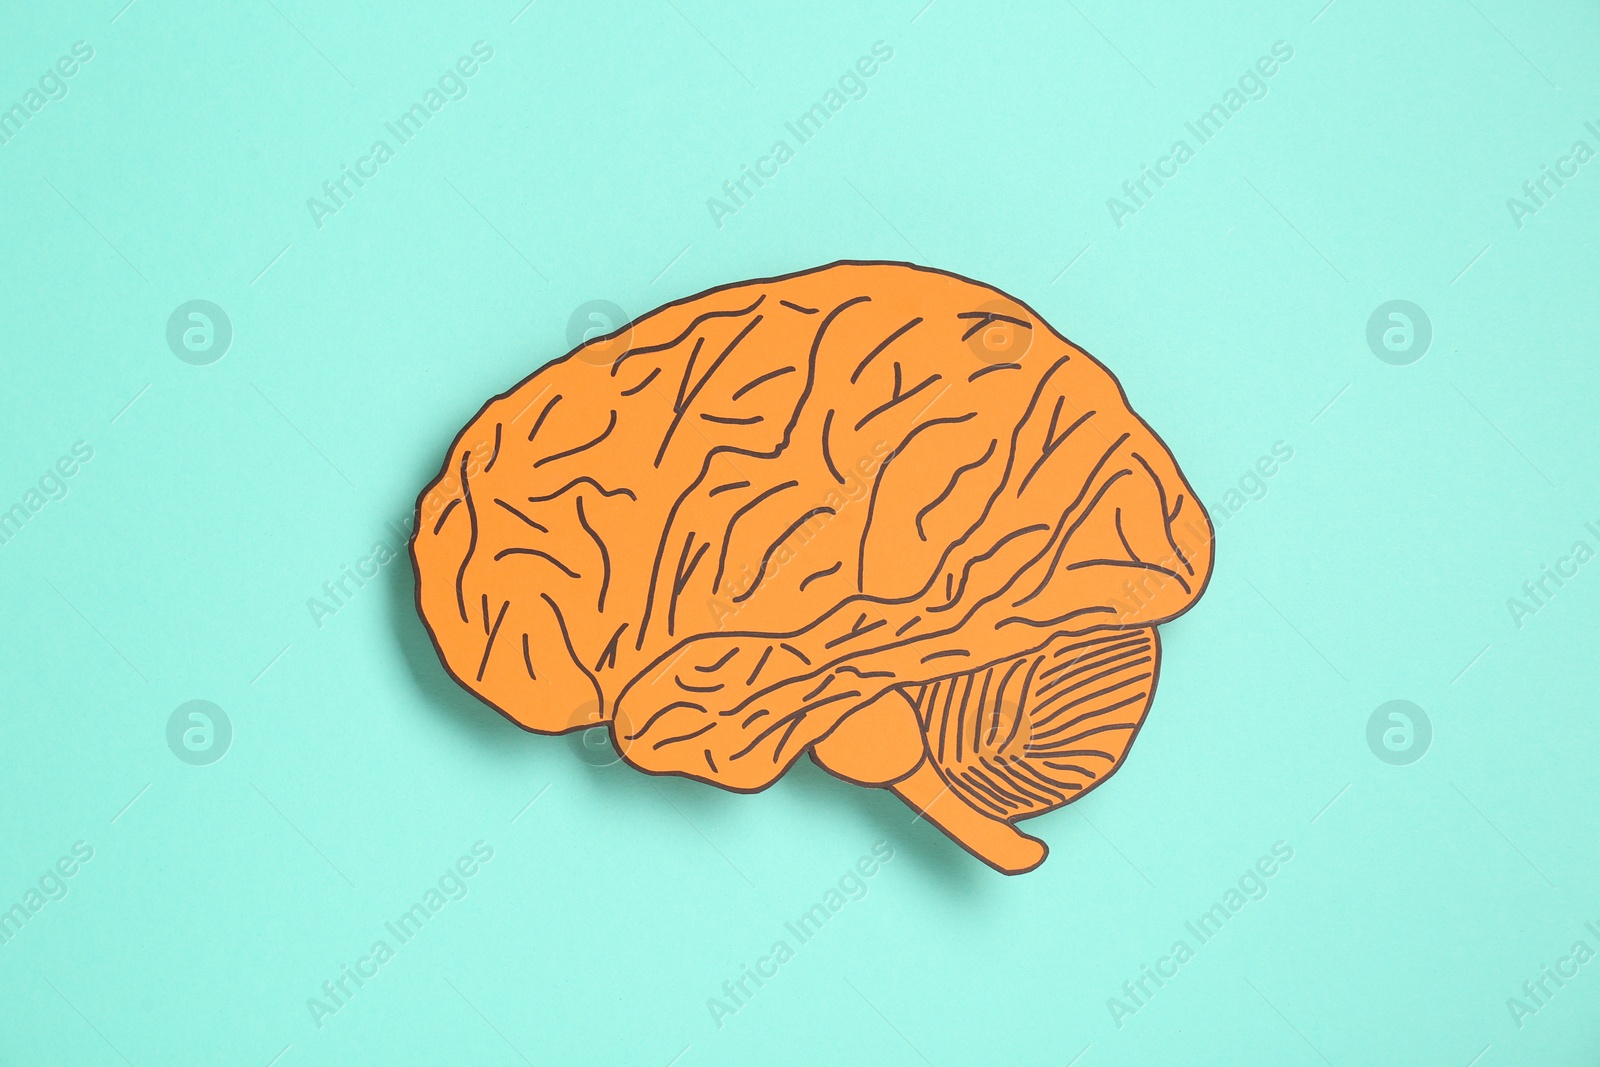 Photo of Paper cutout of human brain on light blue background, top view